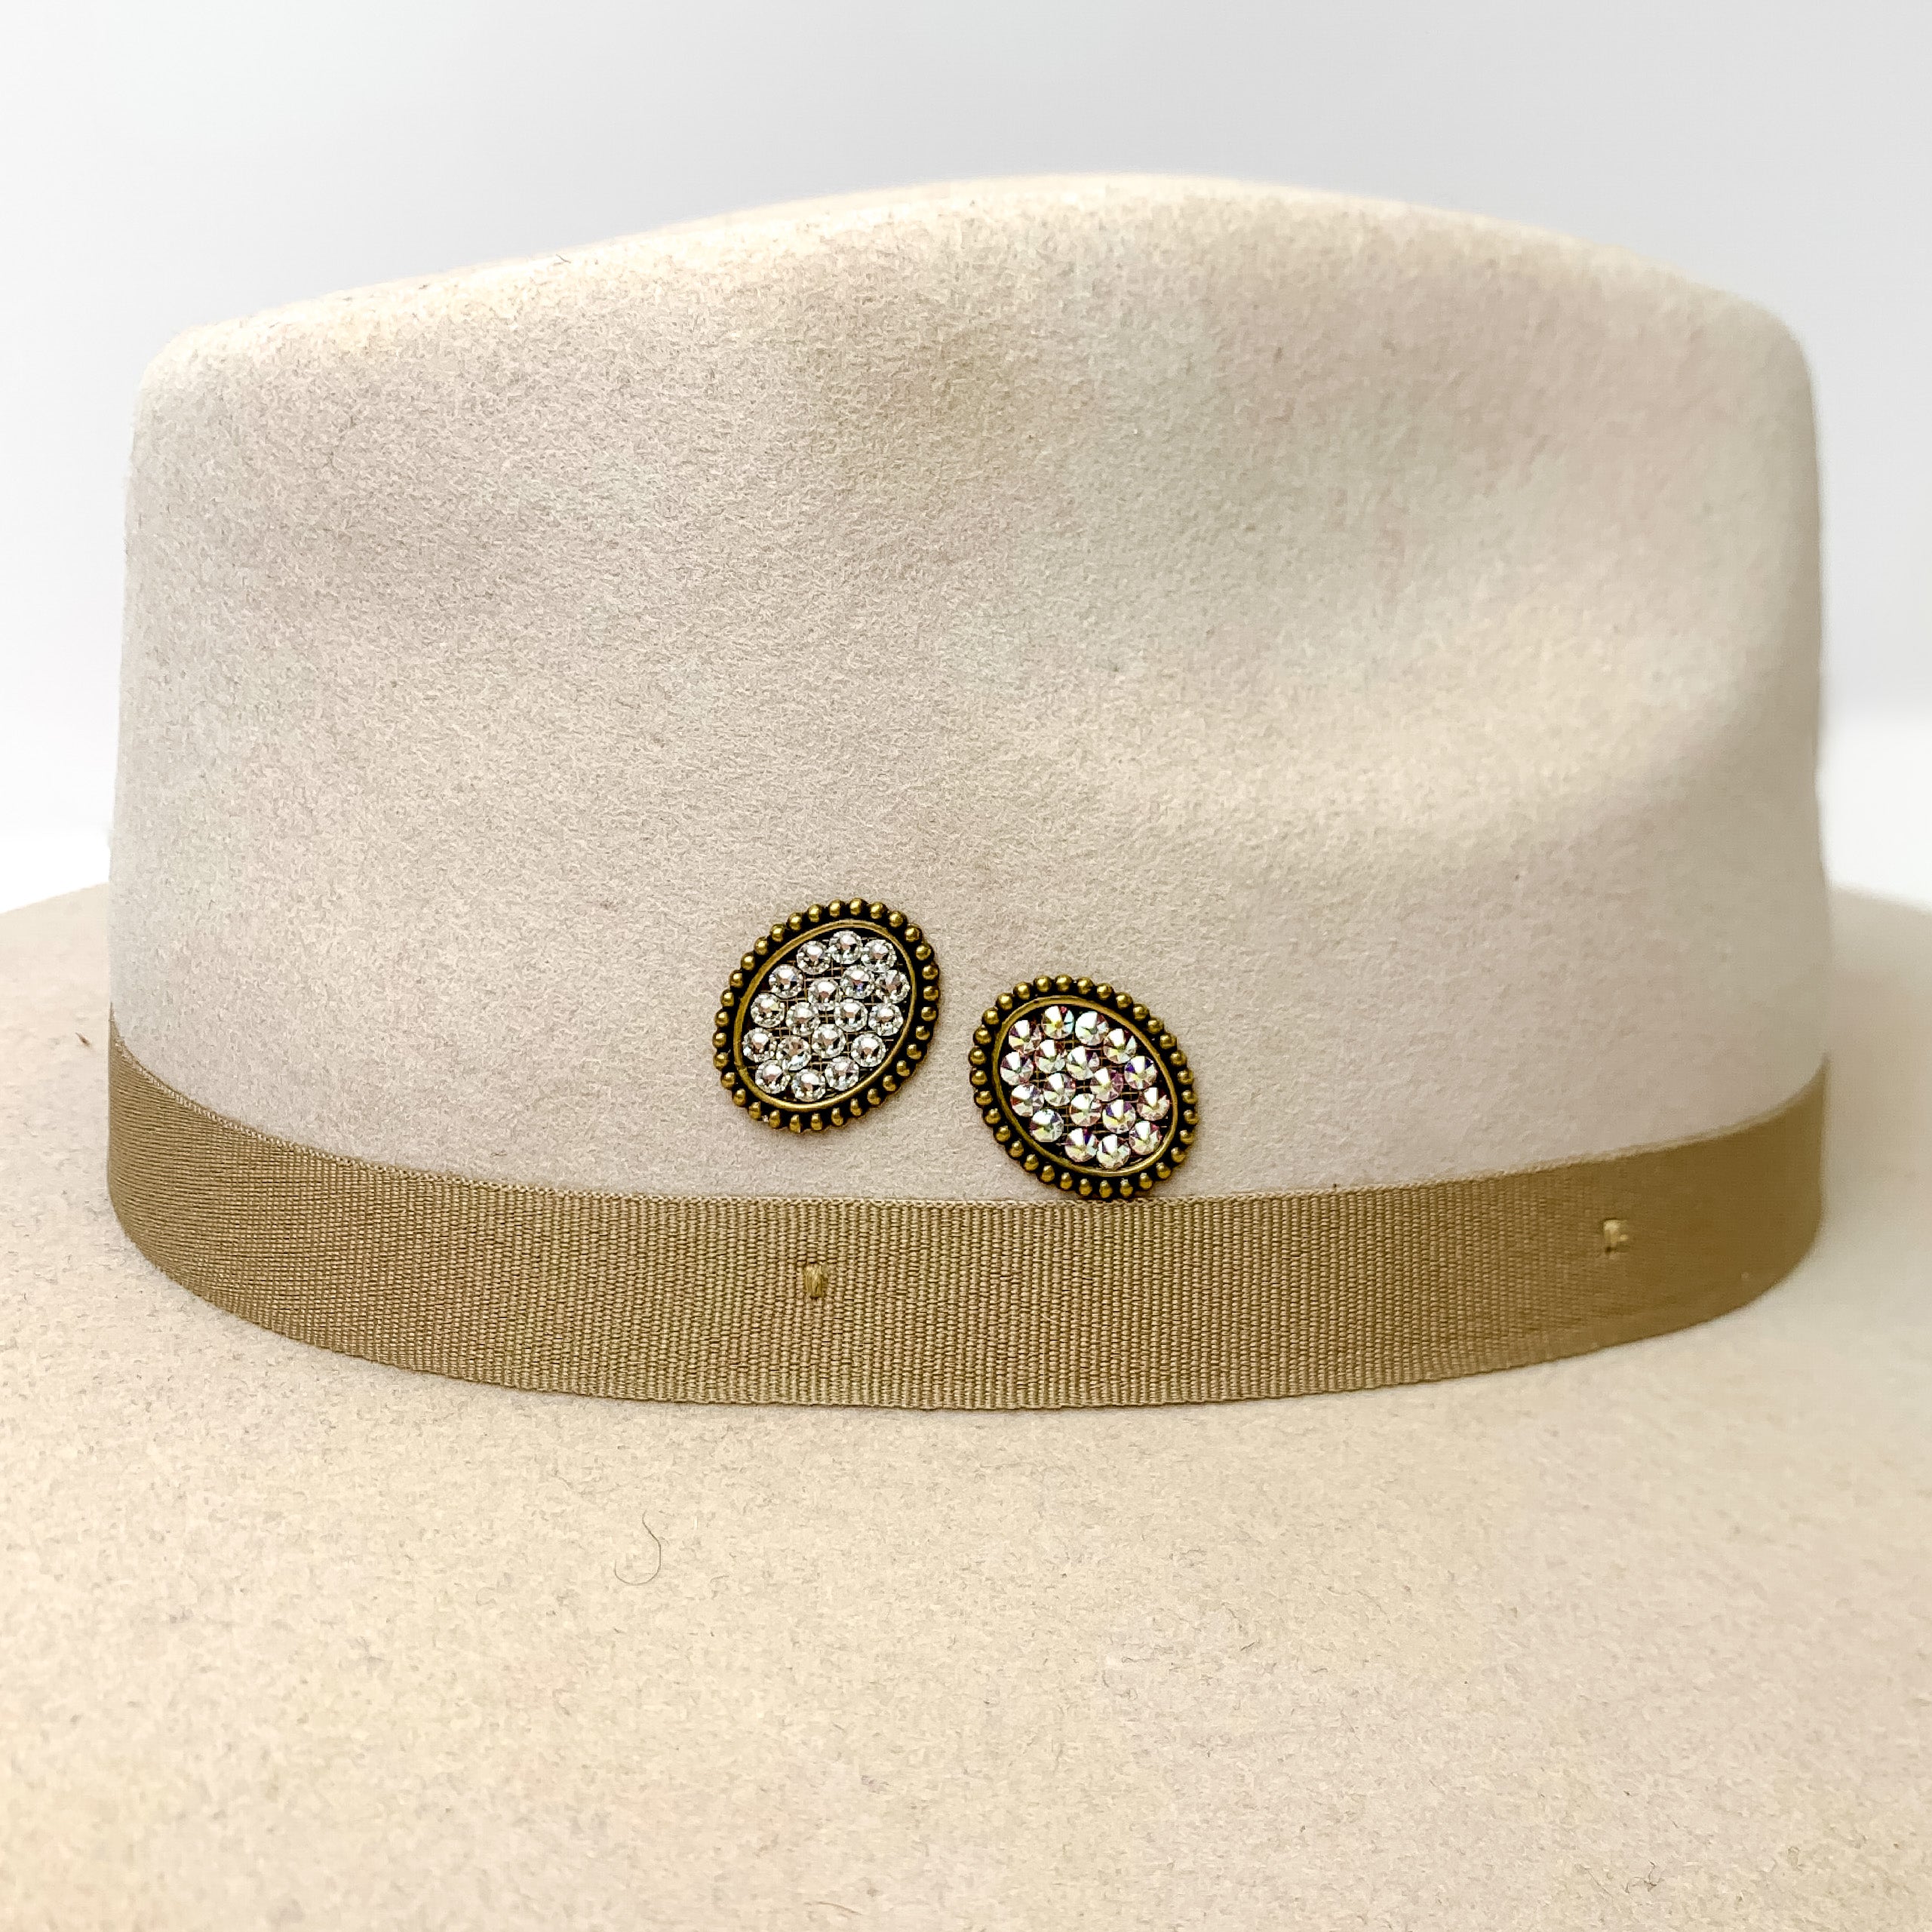 Pink Panache | Bronze Tone Oval Hat Pin with Clear Crystals - Giddy Up Glamour Boutique